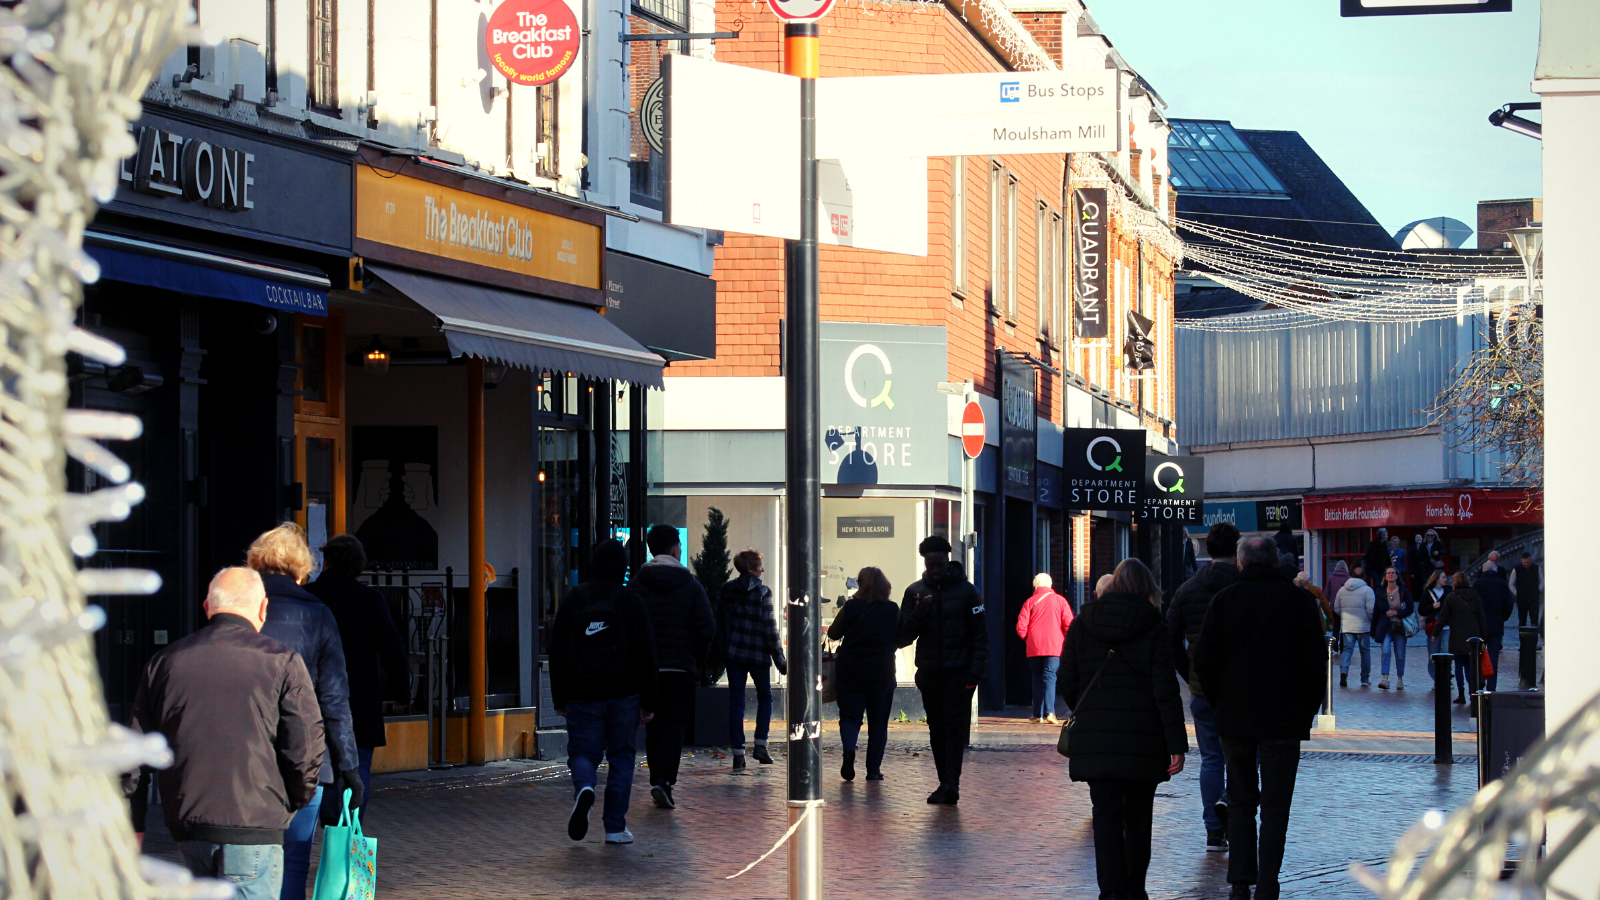 Moulsham Street Is A Popular Pedestrian Route In To Chelmsford High Street